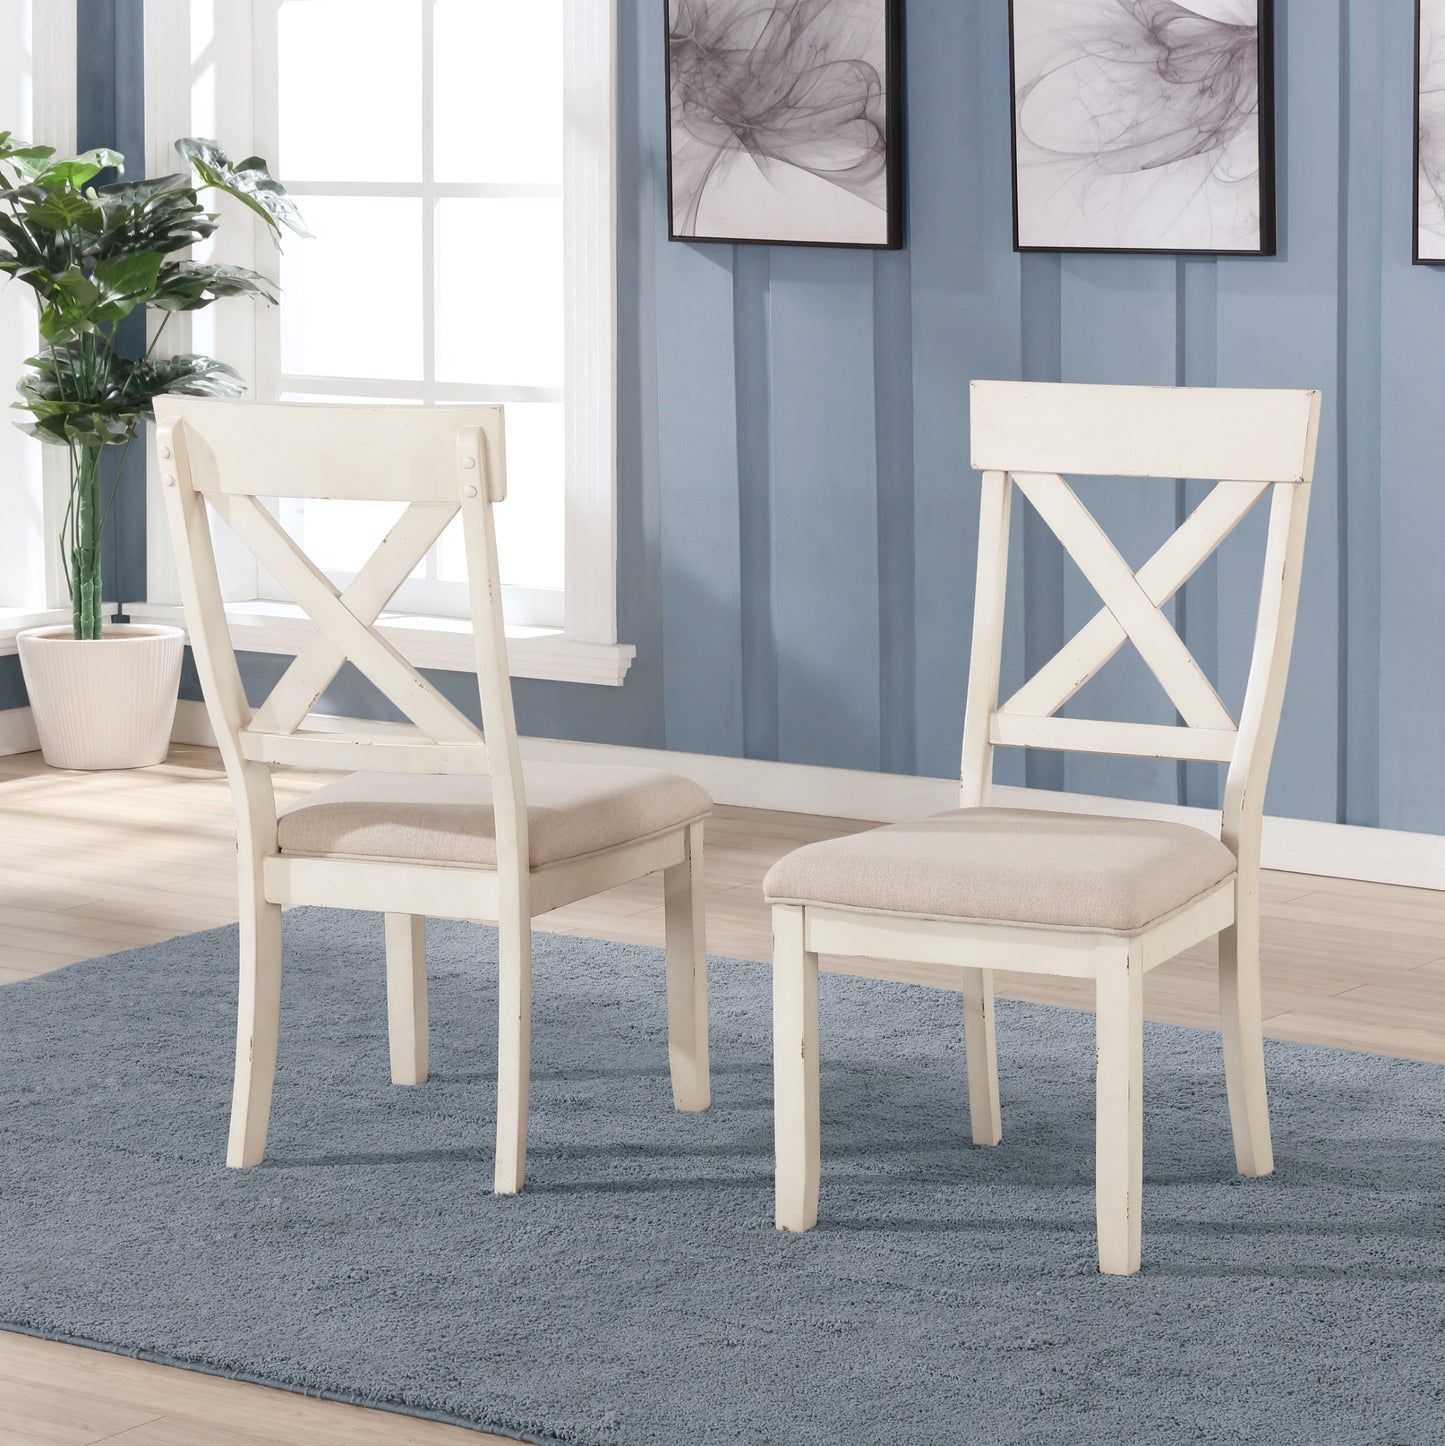 Prato 7-piece Dining Table Set With Cross Back Chairs, Antique White and Distressed Oak